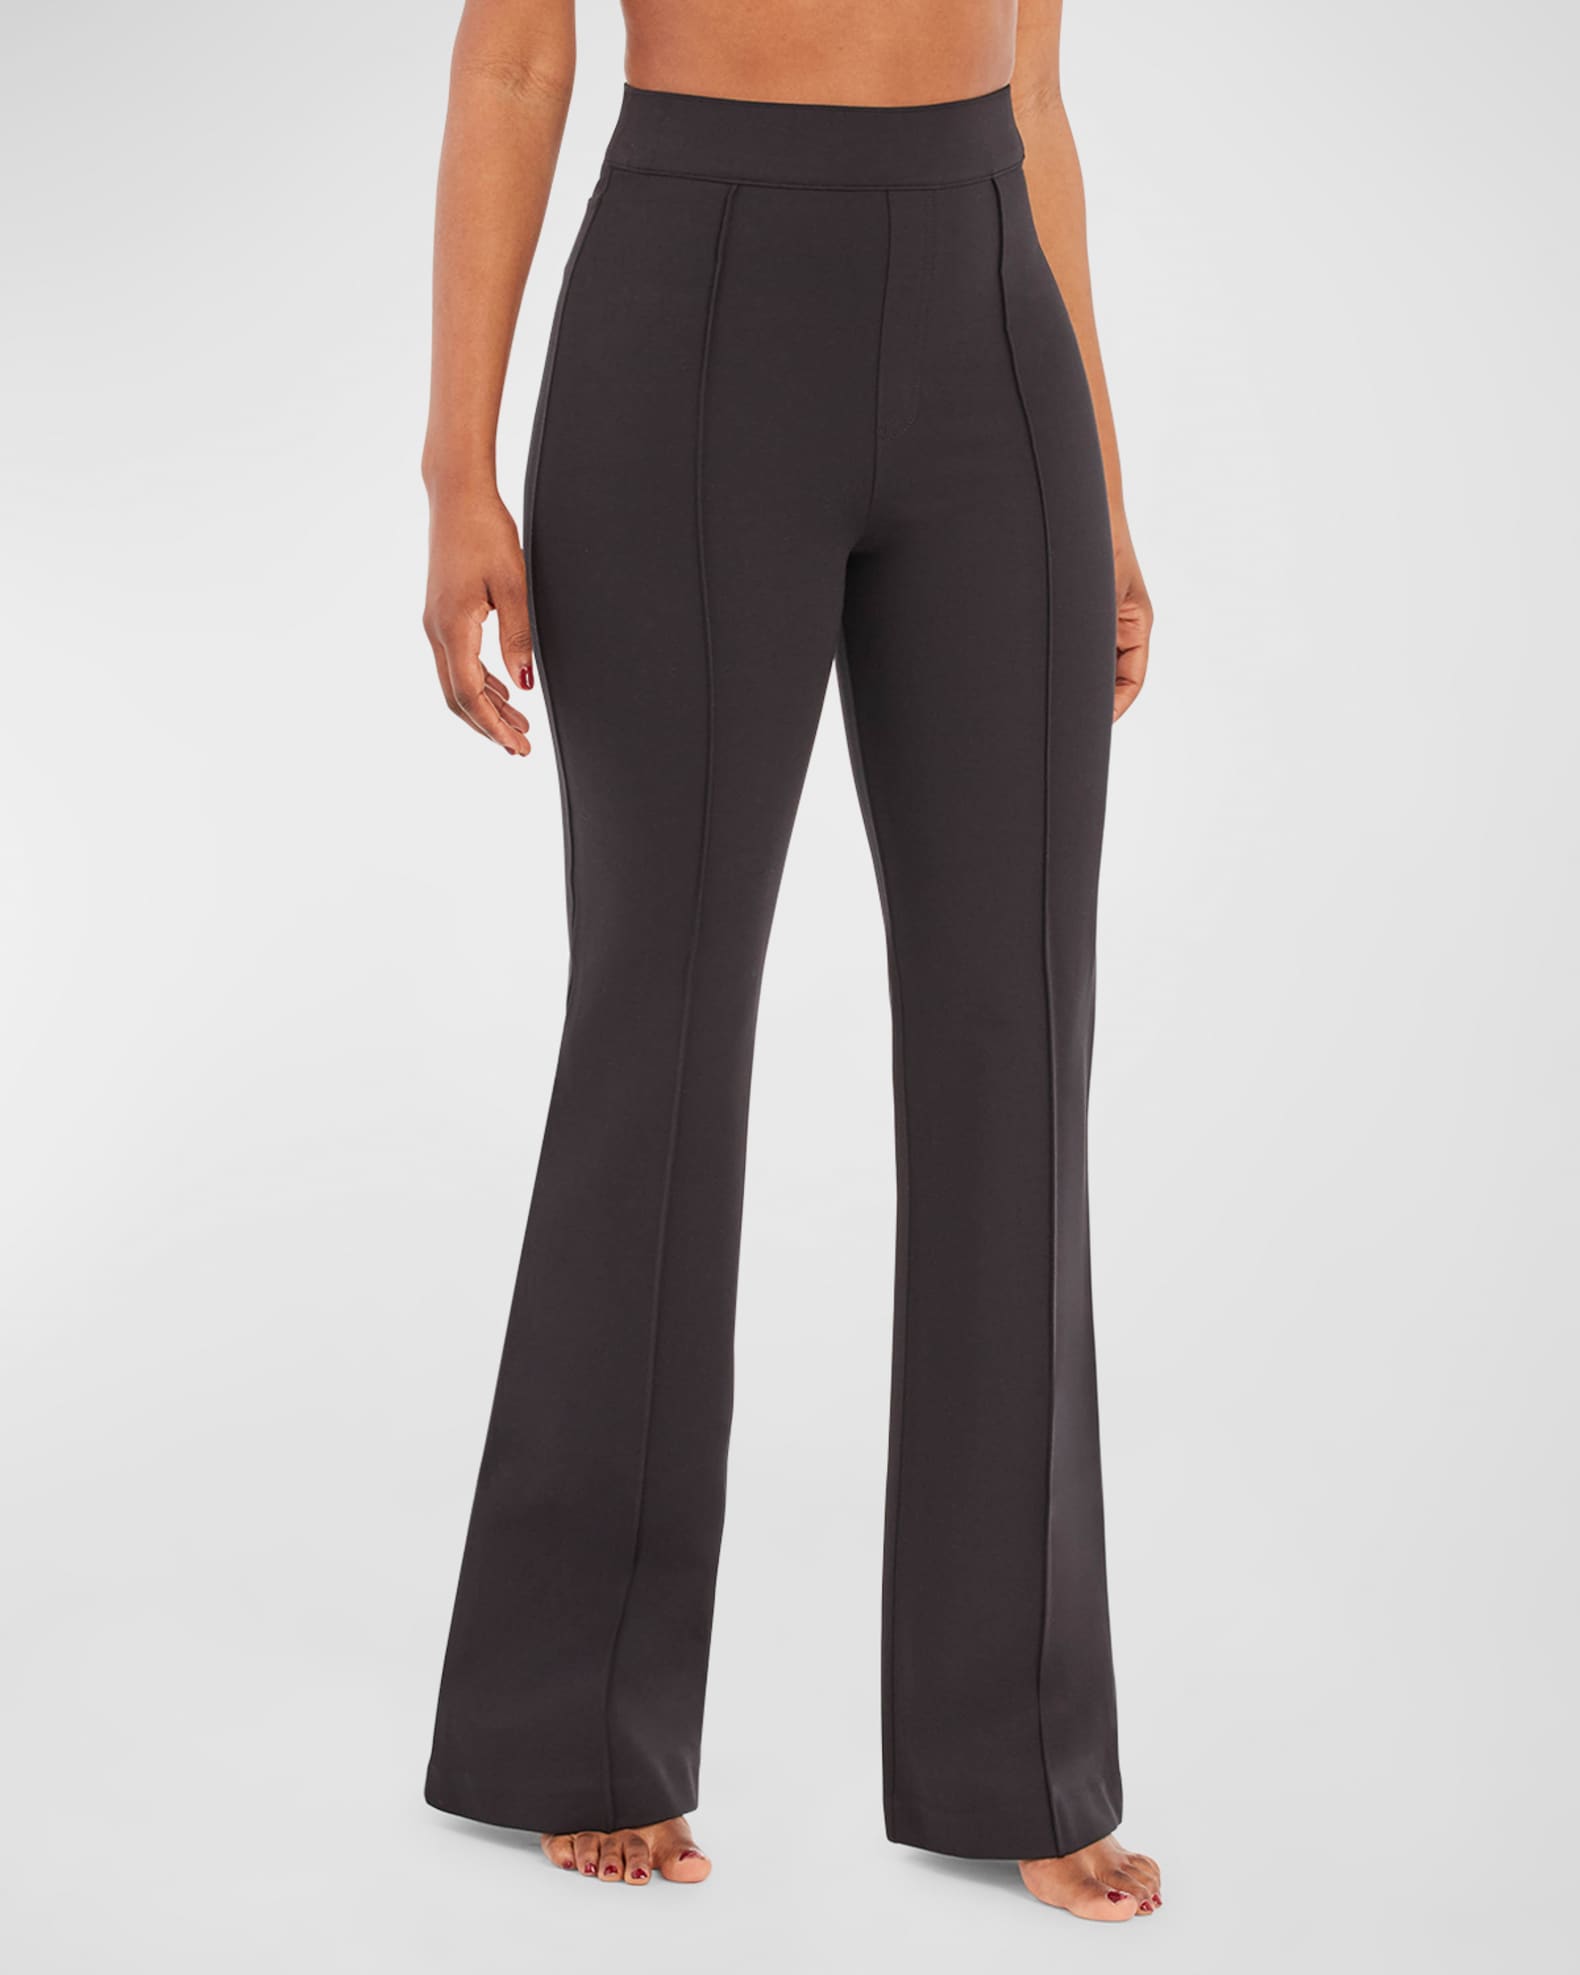 SPANX, Pants & Jumpsuits, New Spanx The Perfect Pant Hirise Flare Size Small  Petite